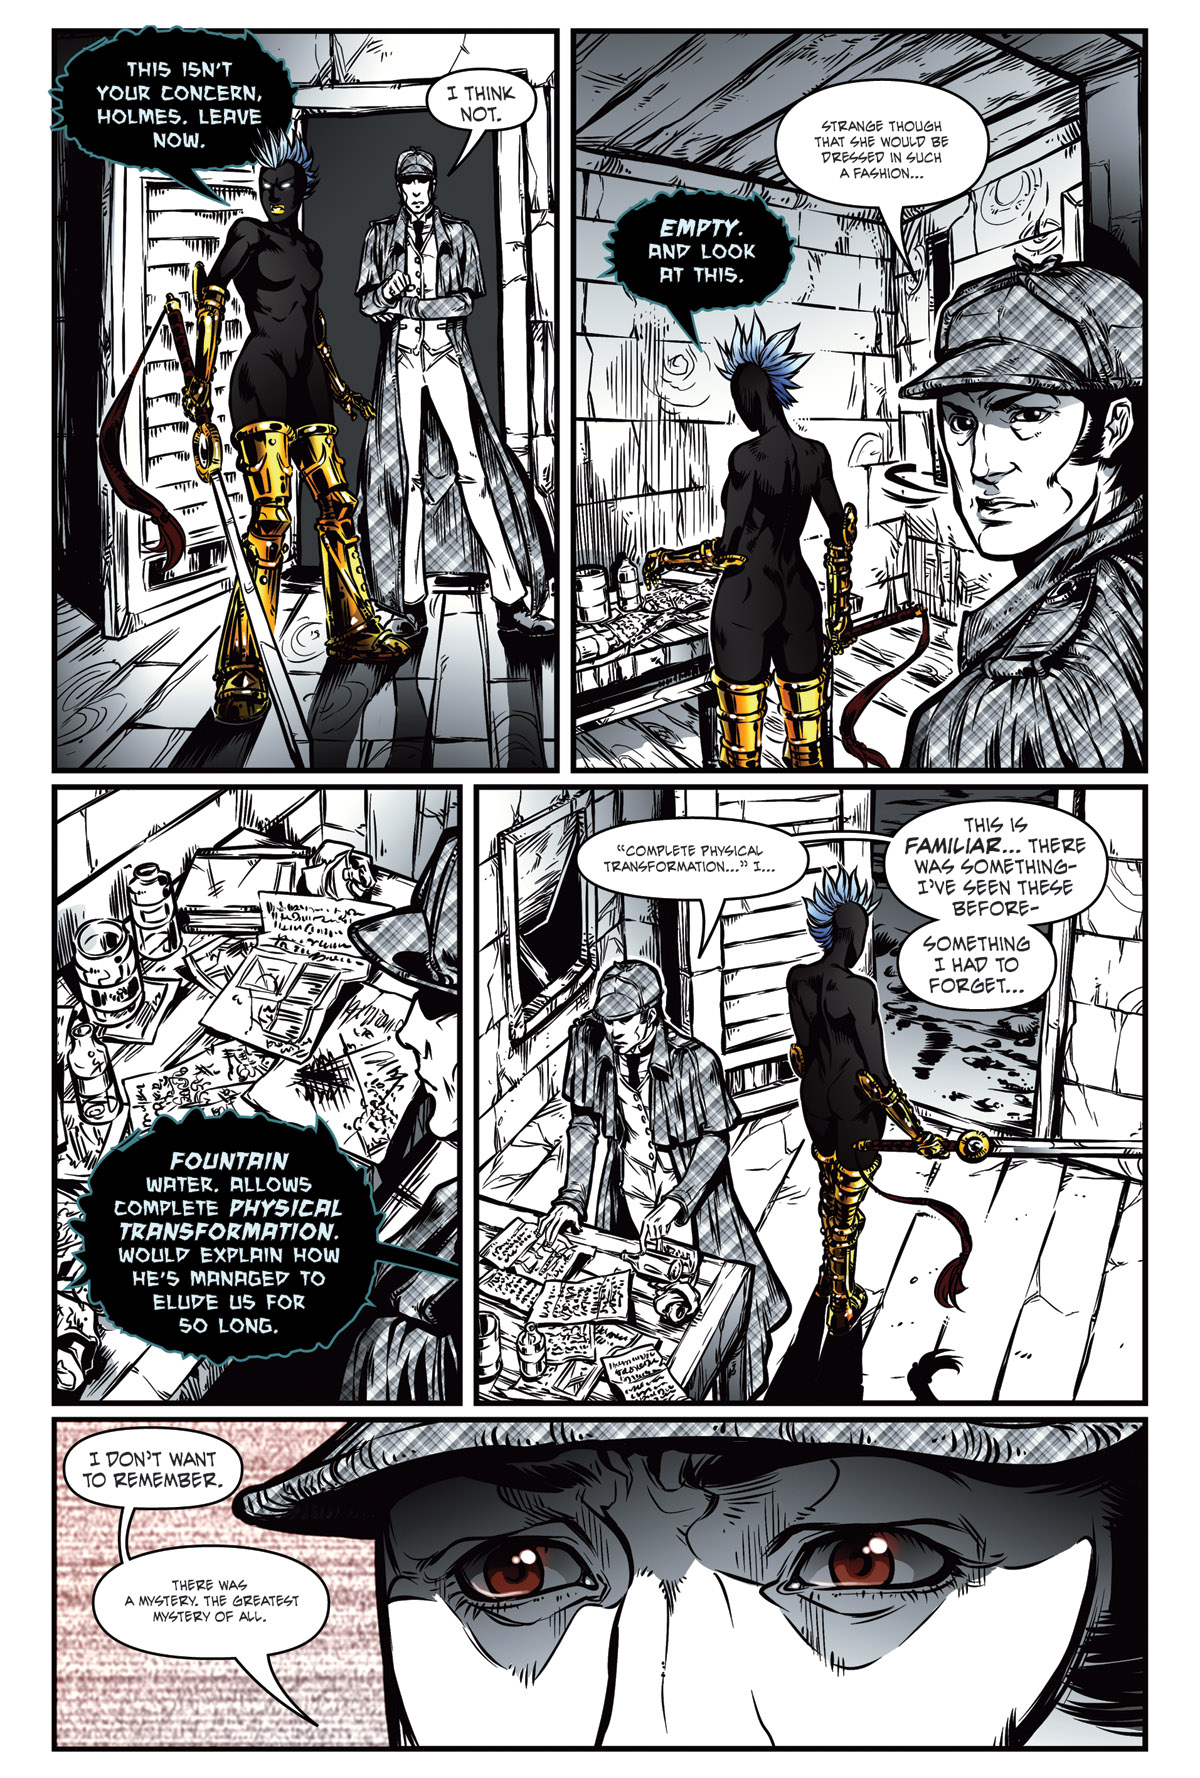 Afterlife Inc. | Elementary | Page 6